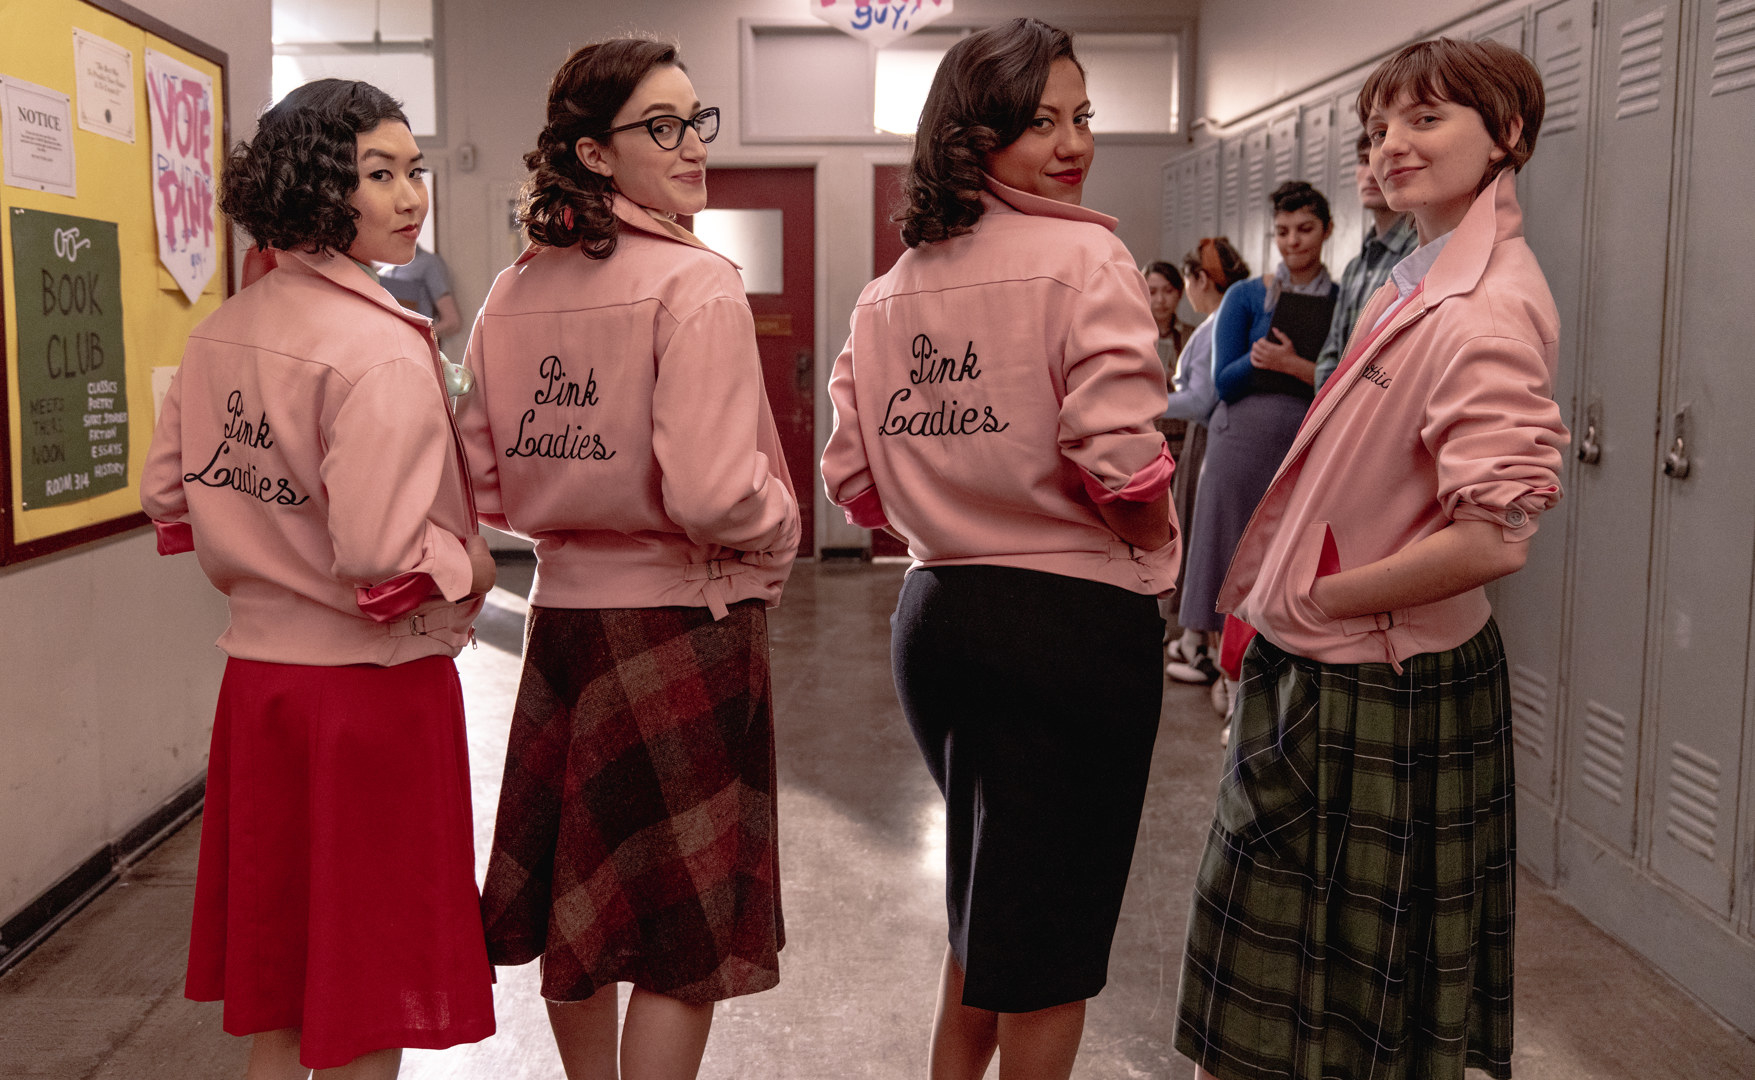 The Pink Ladies in a school hallway wearing their matching jackets and knee-length skirts